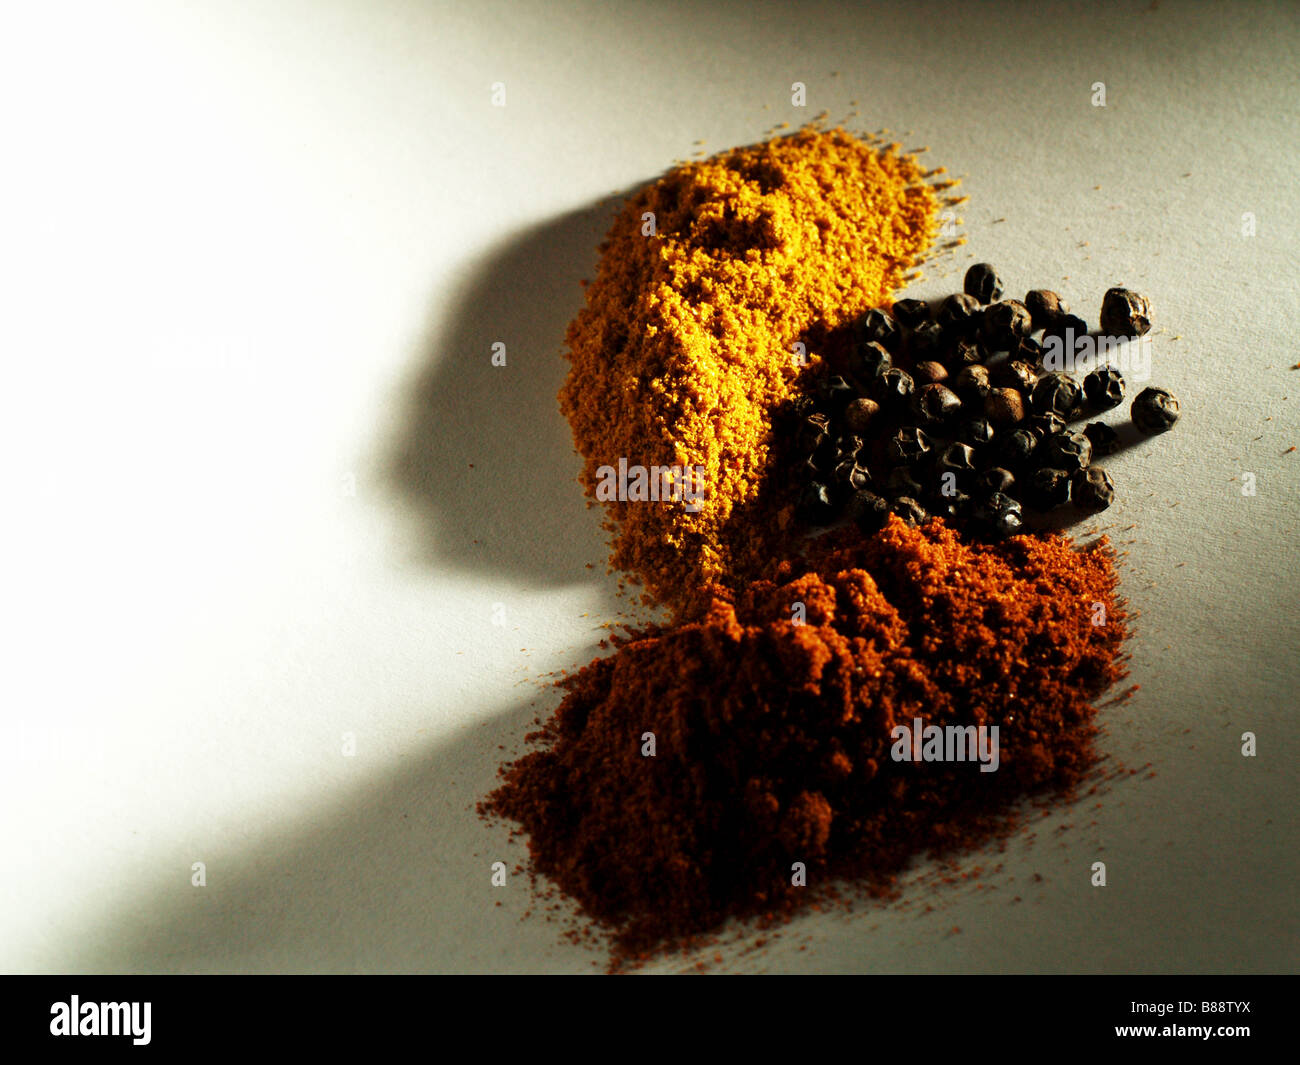 Spices on a white background. Stock Photo